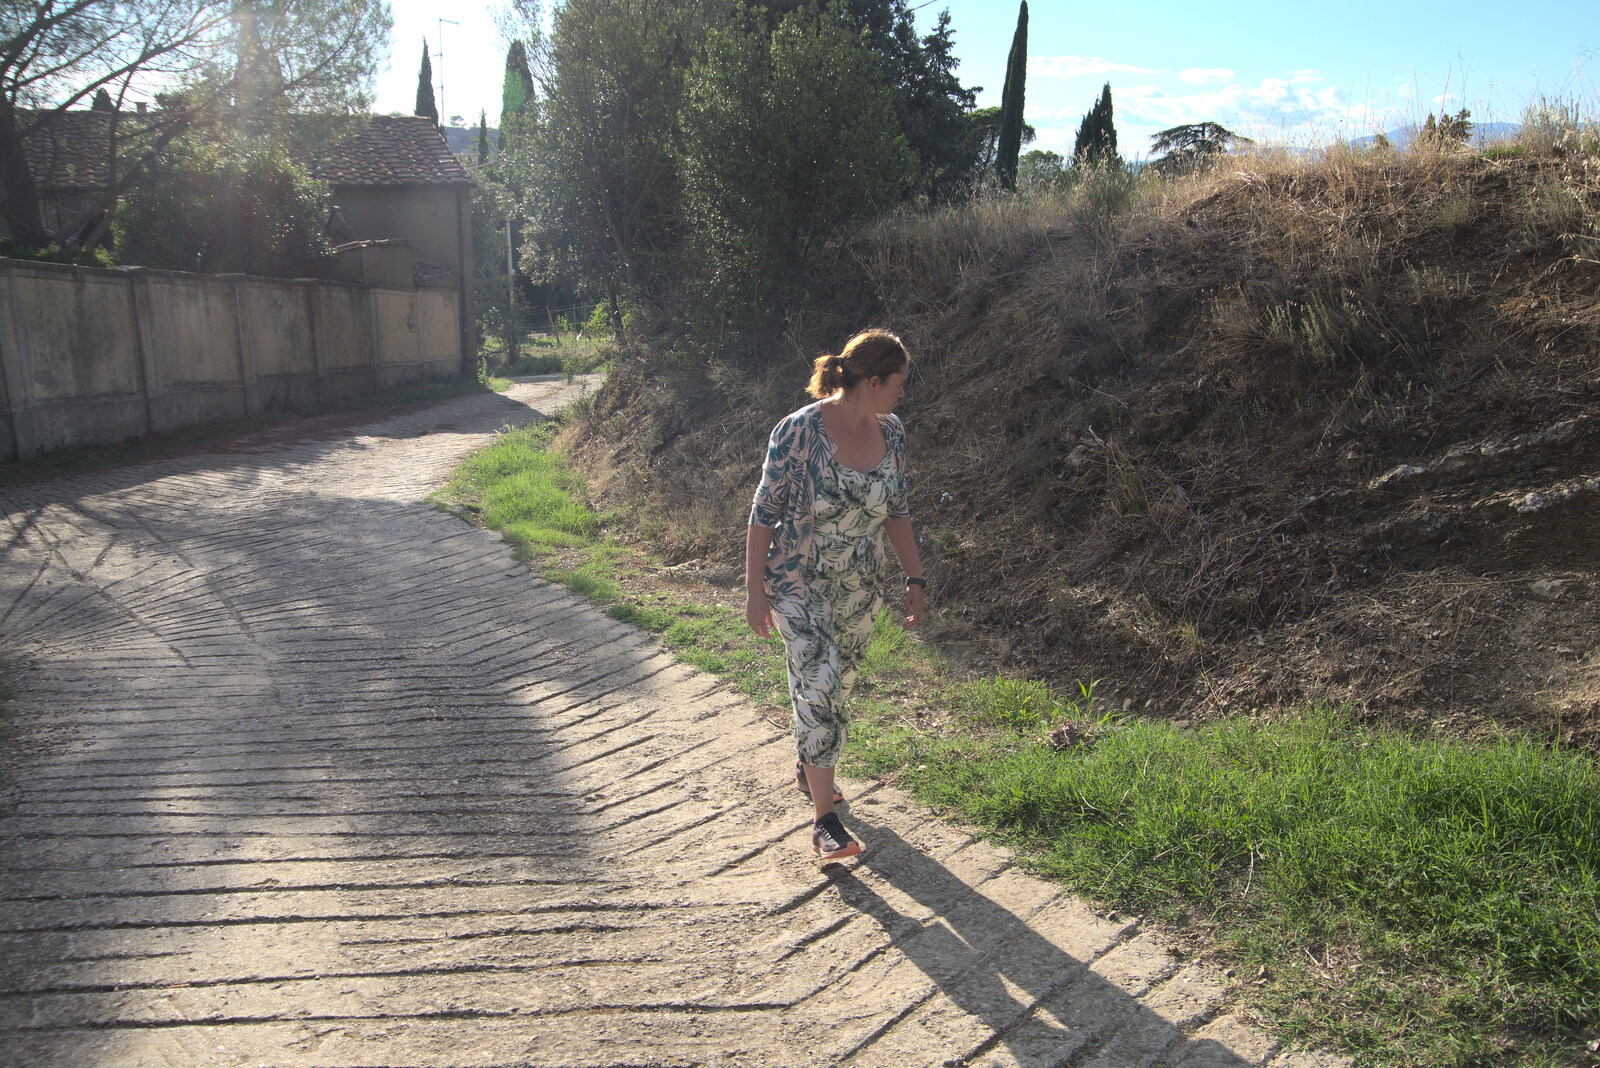 A Day by the Pool and a Festival Rehearsal, Arezzo, Italy - 3rd September 2022: We go for a walk up the path behind the estate